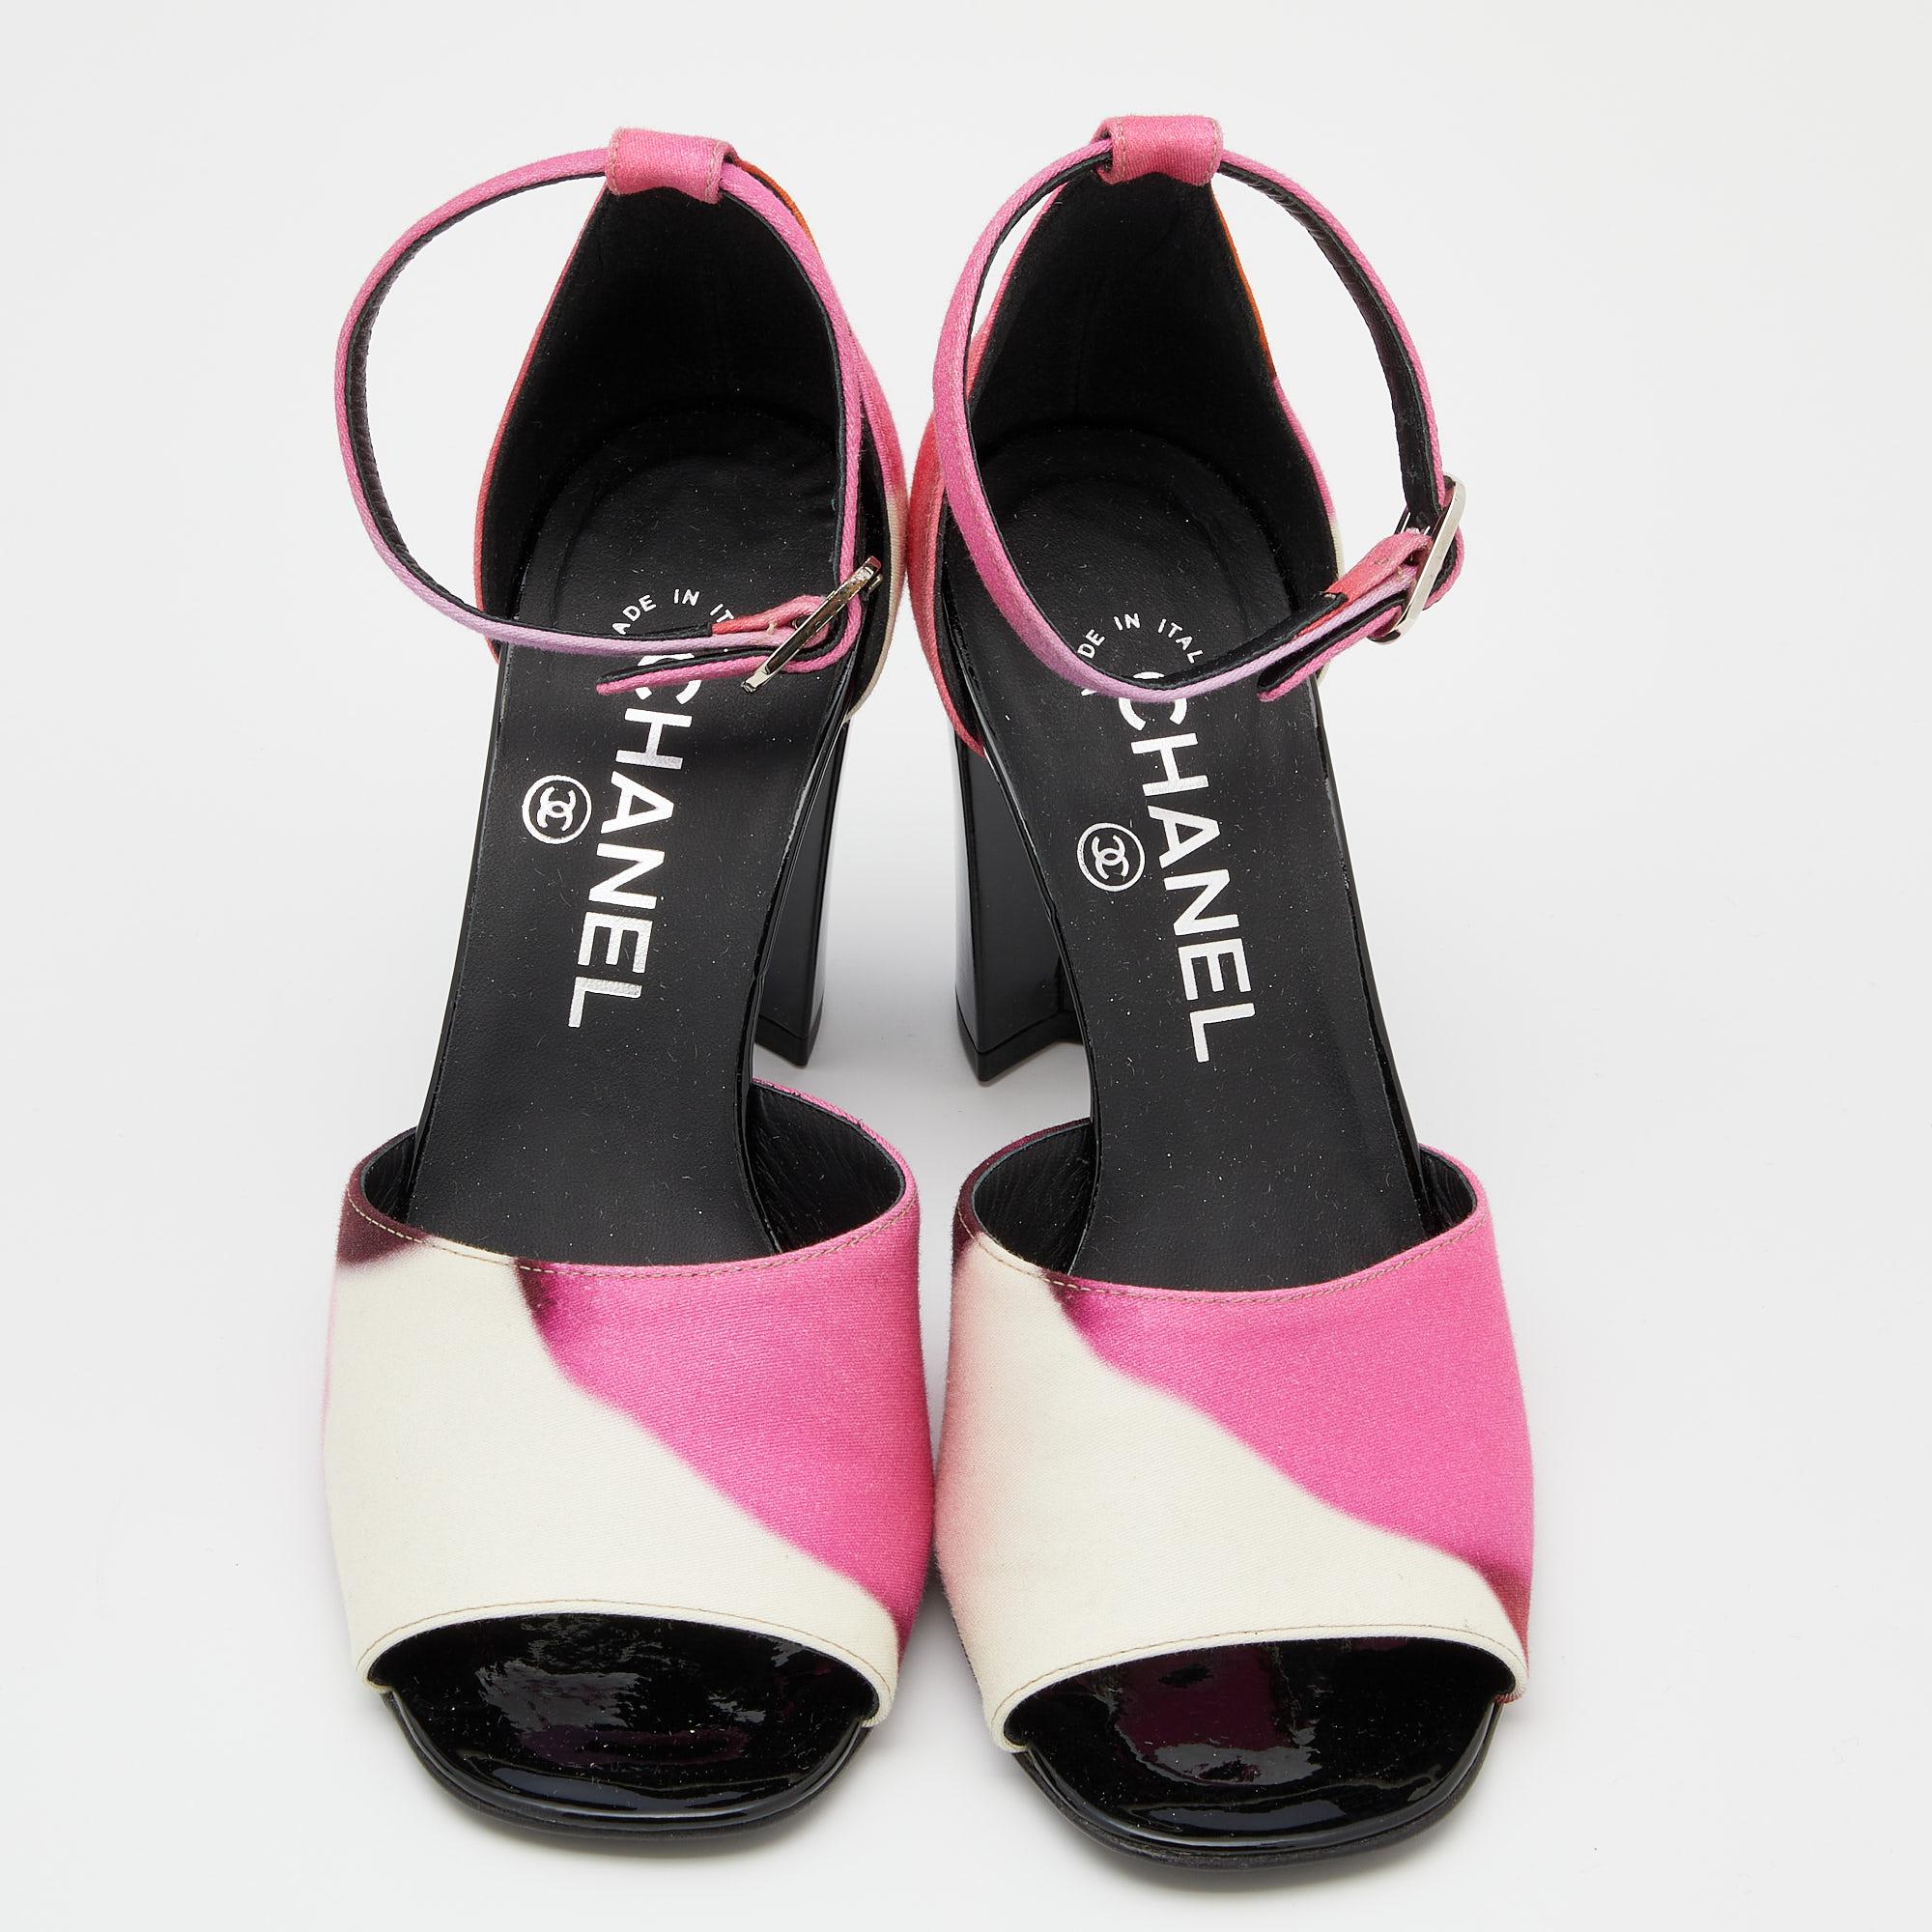 The employment of multicolor fabric makes these Chanel sandals more stylish. Lined with leather, they flaunt open toes and ankle buckle closure. The wide strap on the vamps and the brand signature on the covered-up counters add to the overall